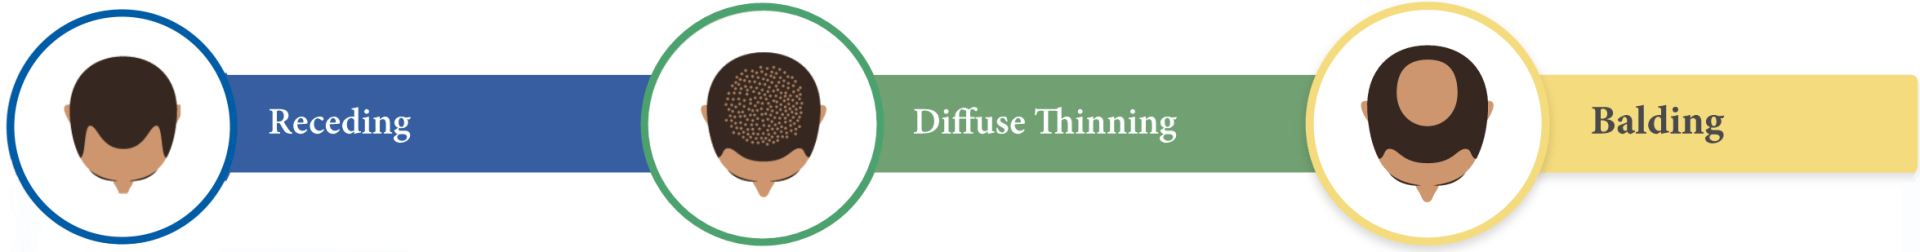 before and afters receding hair, diffuse thinning, balding hair